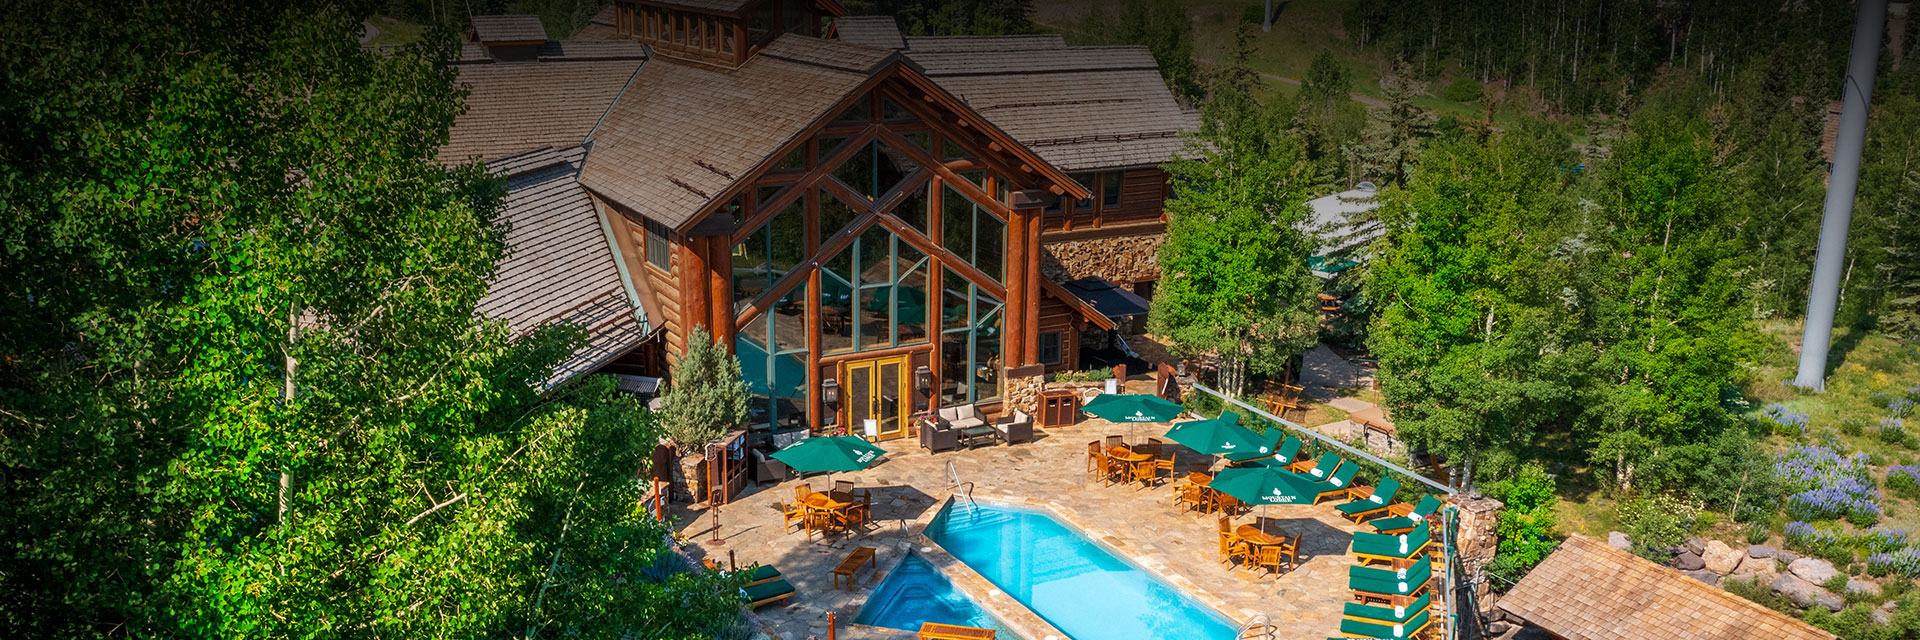 a view of the lodge and the pool area with tall green trees all around it